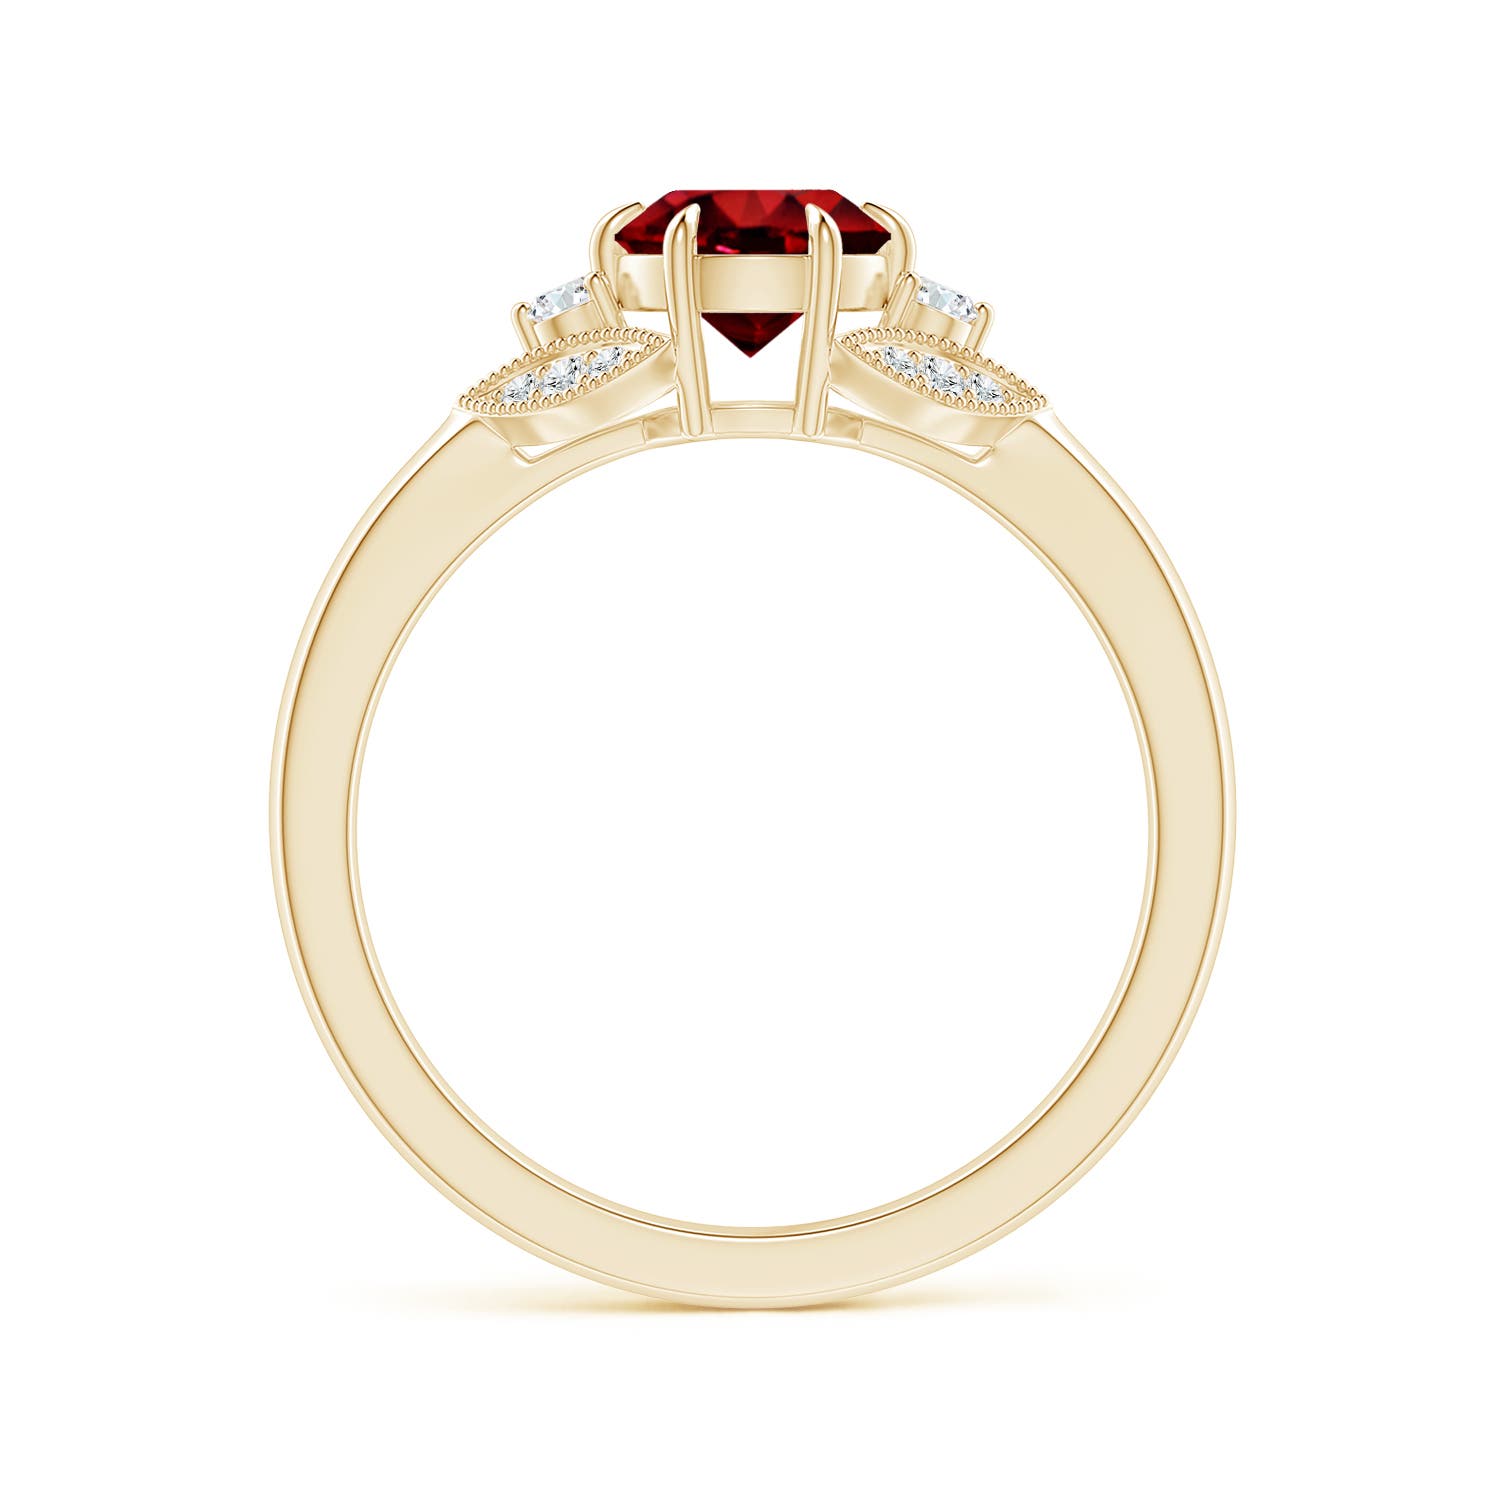 AAAA - Ruby / 1.1 CT / 14 KT Yellow Gold